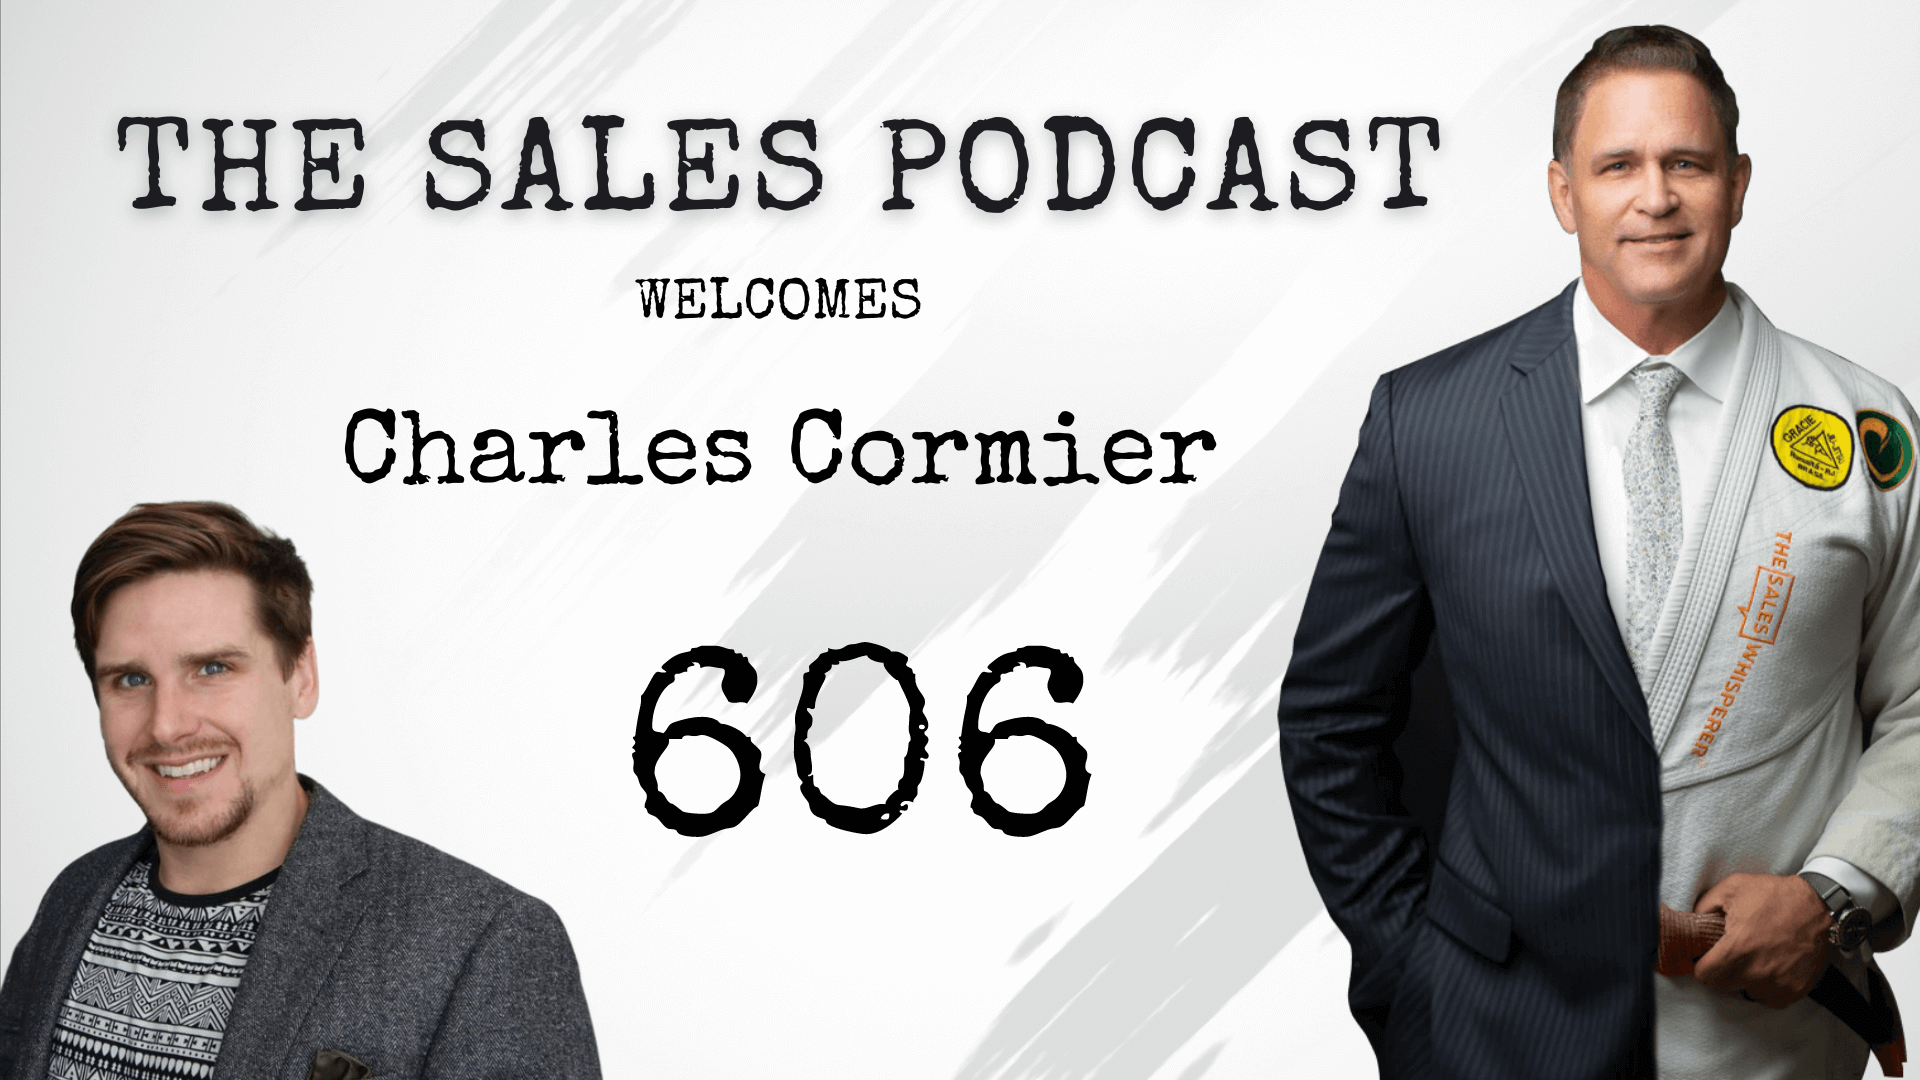 Charles Cormier on The Sales Podcast with Wes Schaeffer, The Sales Whisperer® 